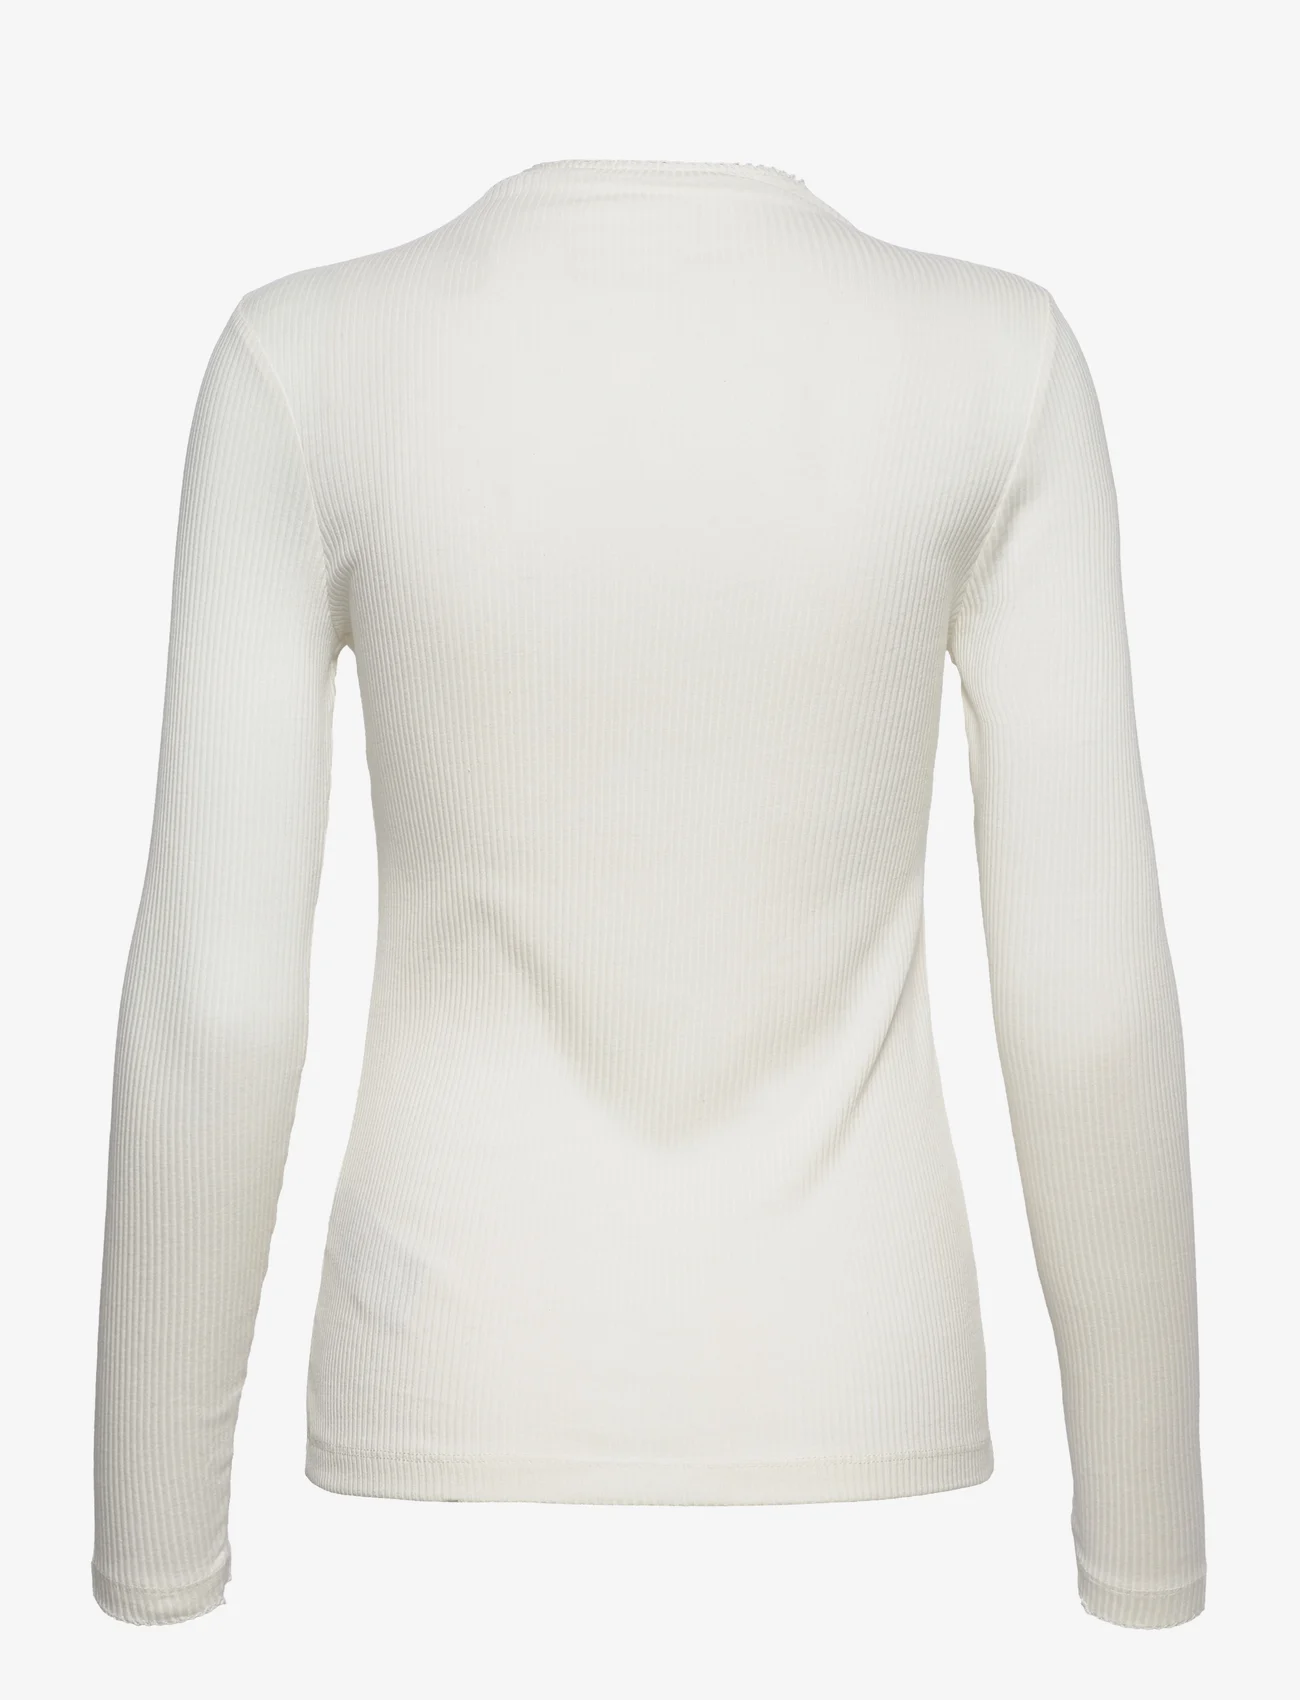 Esprit Casual - Ribbed long sleeve top, cotton blend - langärmlige tops - off white - 1